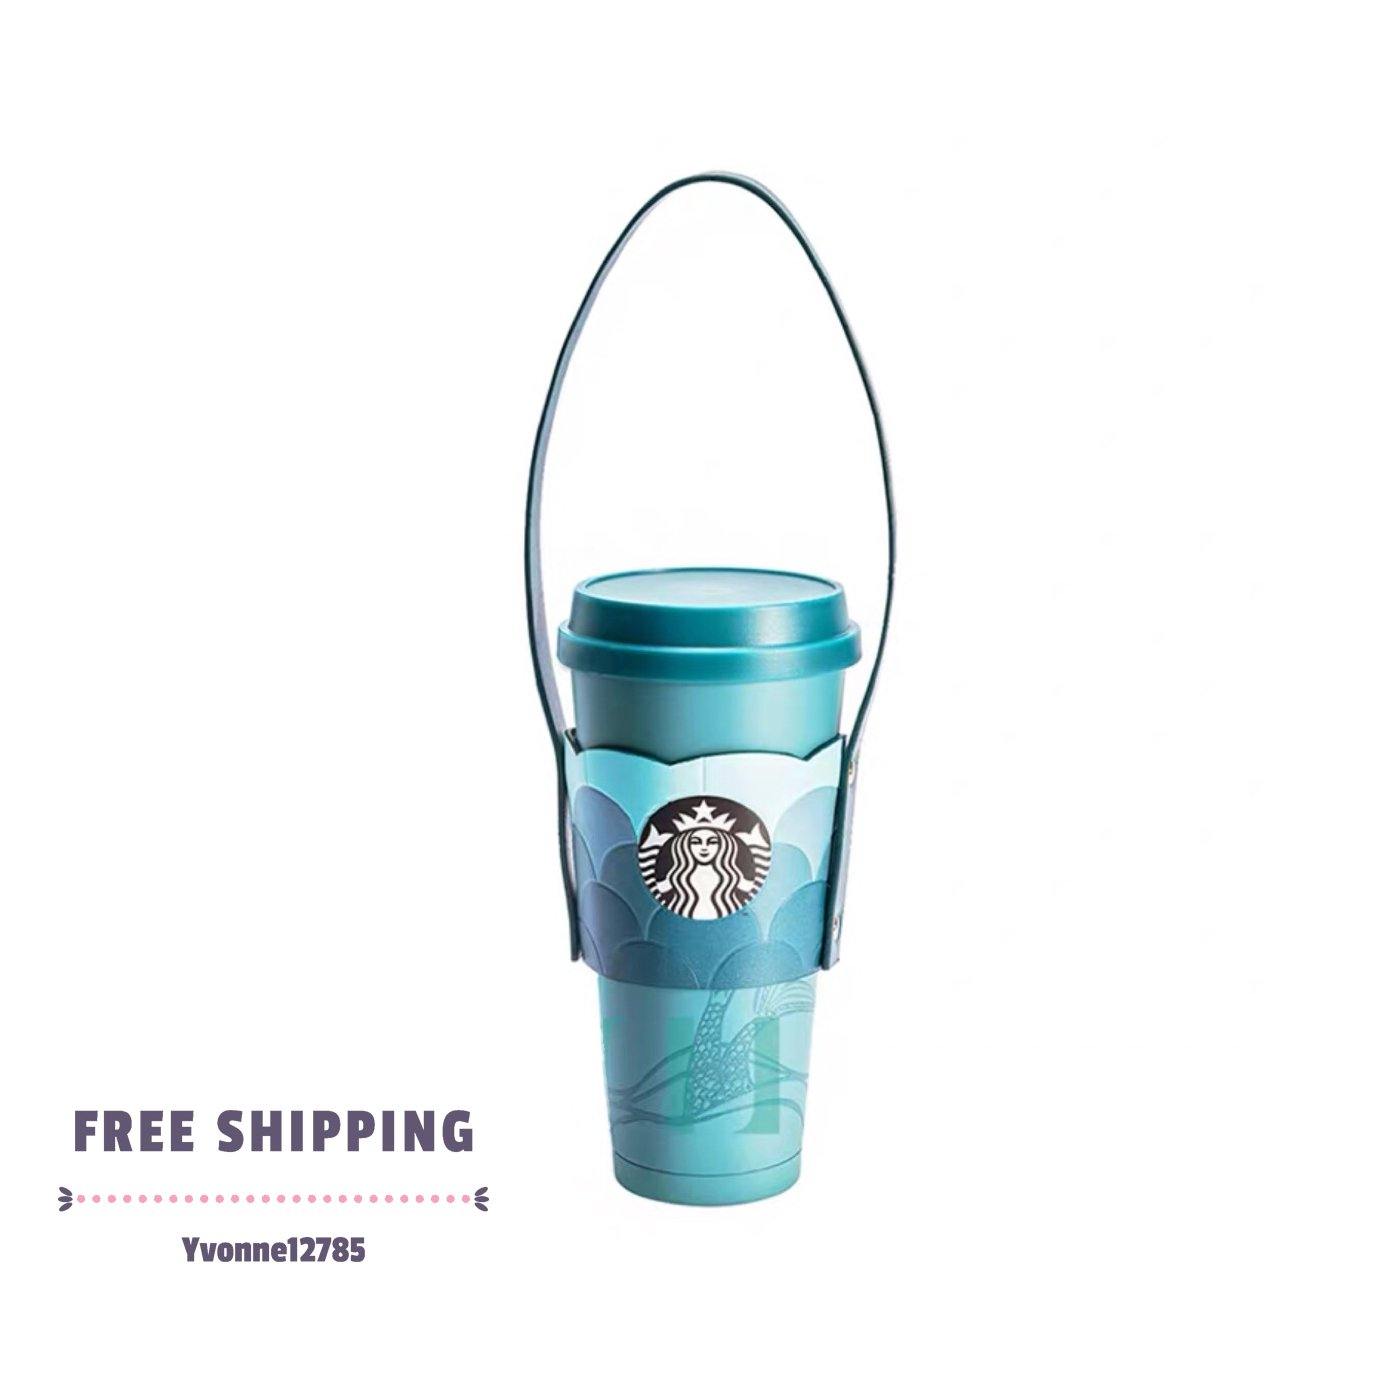 Starbucks 2020 China Anniversary Pisces Tail Xpress 17oz Stainless Steel Cup - Yvonne12785